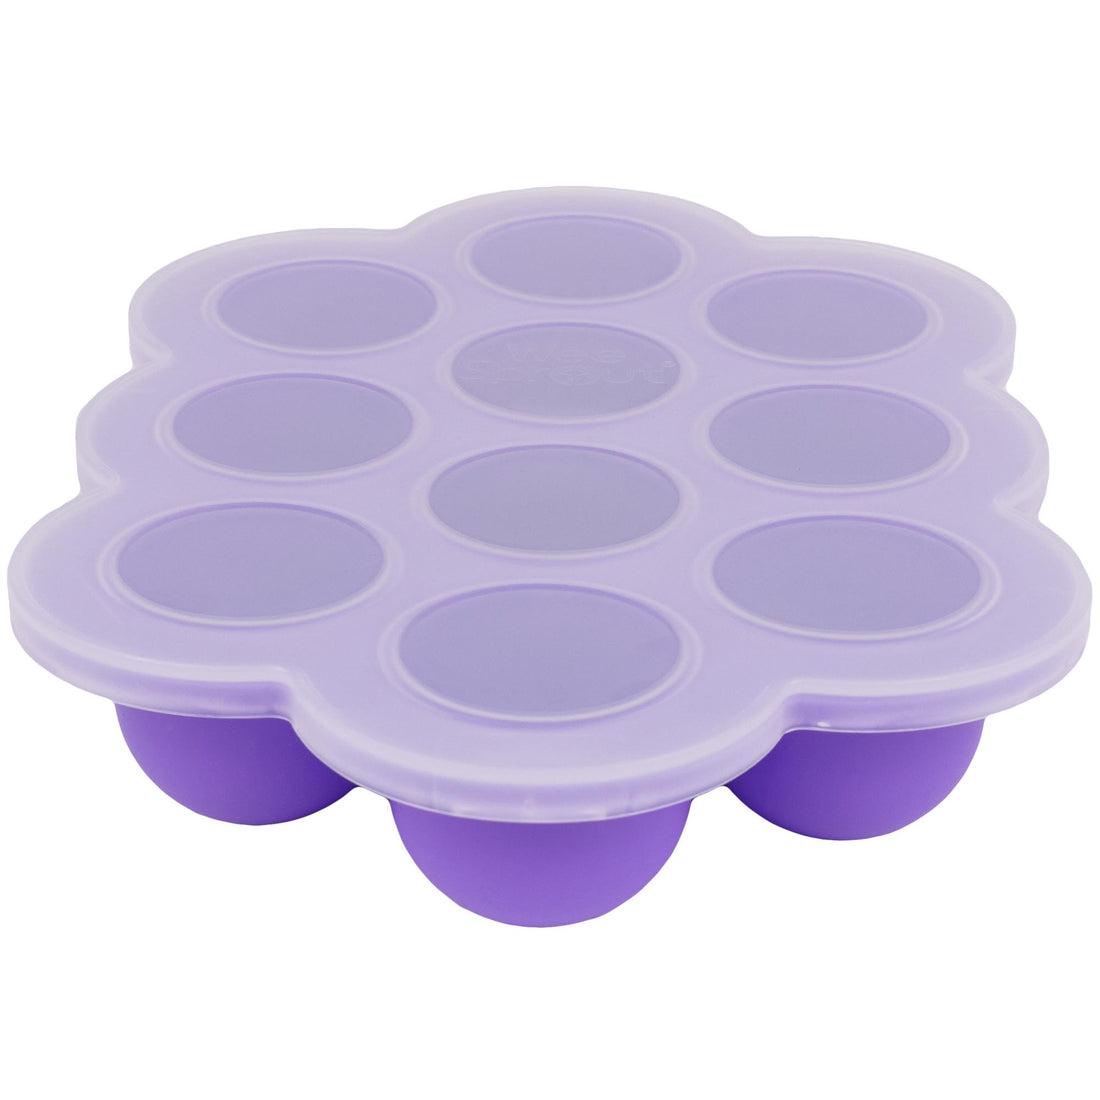 New Star Foodservice 6-Piece Fast Food Tray, 12 by 16-Inch, Assorted Colors